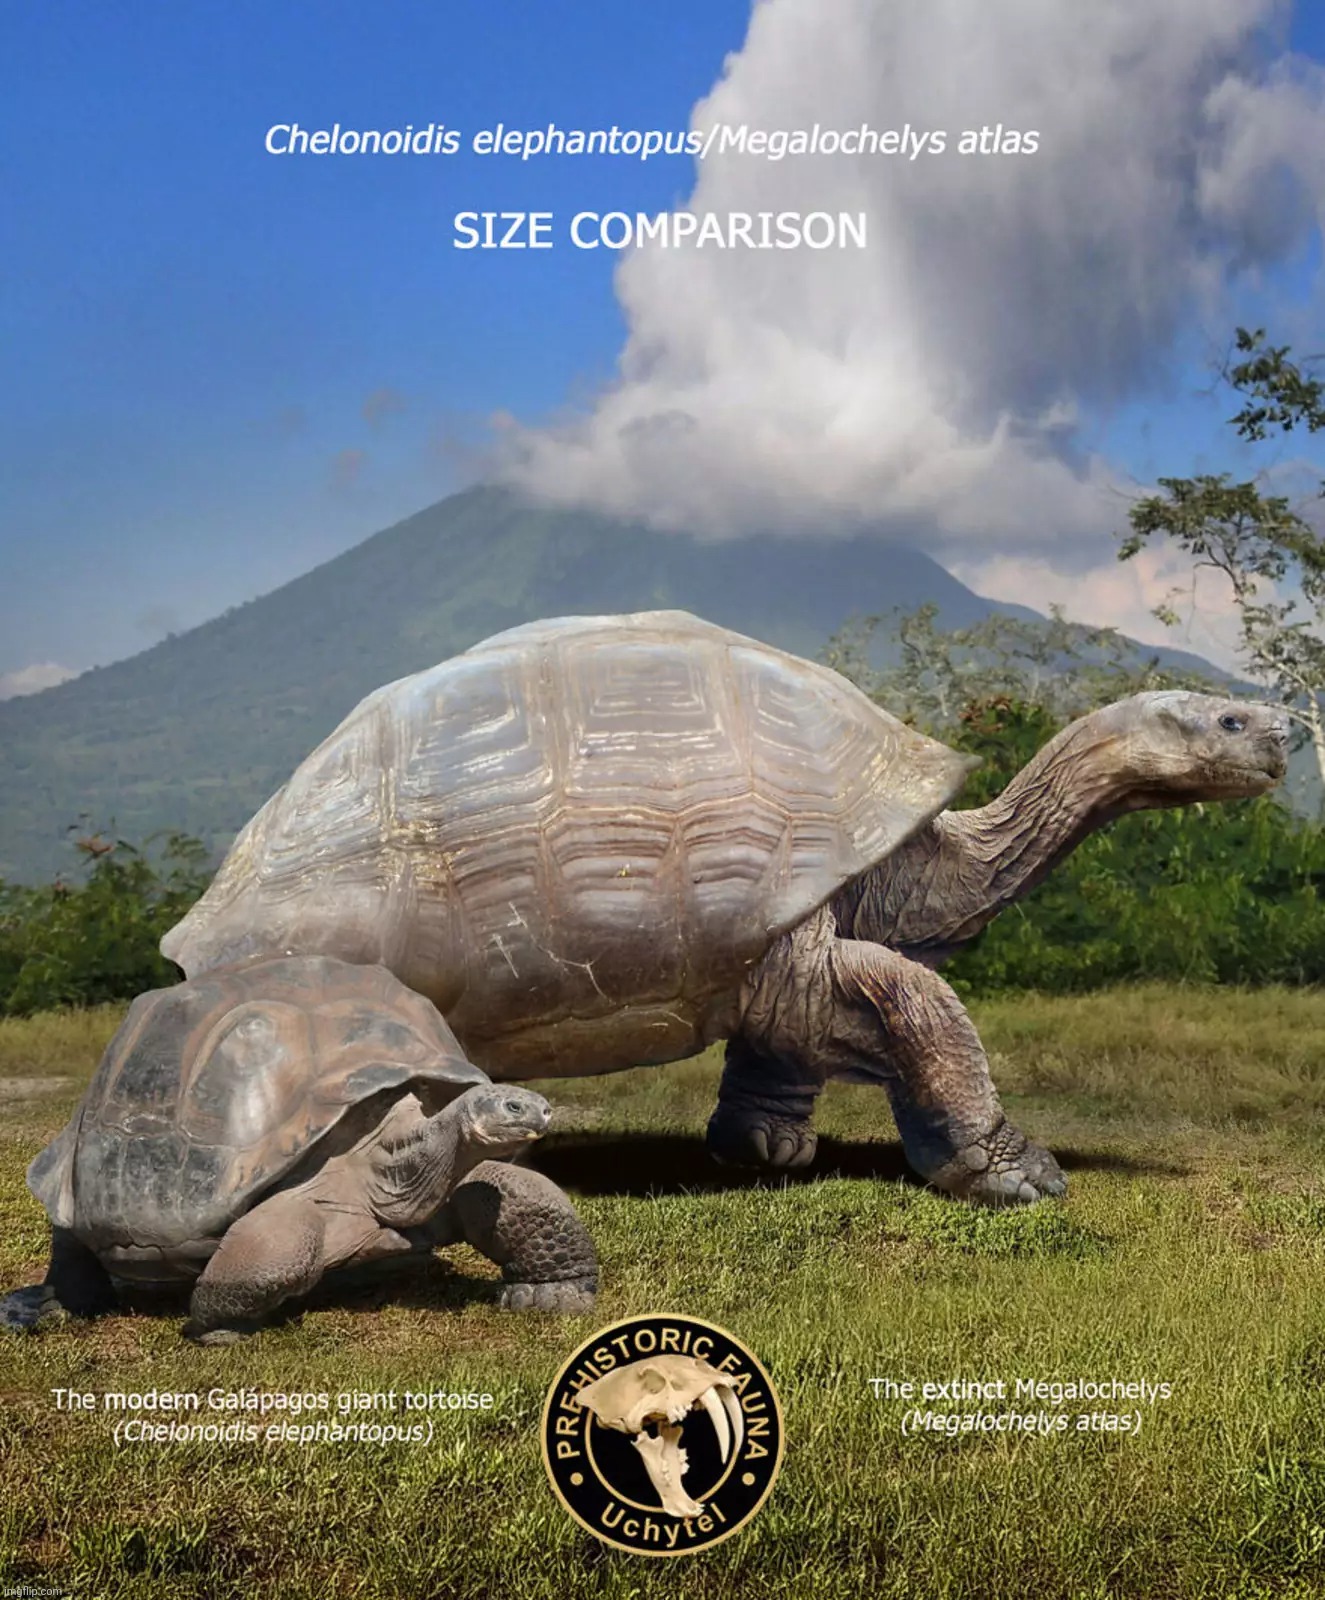 Giant giant tortoise from India, etc, that became extinct at the end of the Ice Age because the glaciers melted in Siberia,,, | image tagged in megalochelys atlas,giant tortoise,prehistoric fauna,tortoise | made w/ Imgflip meme maker